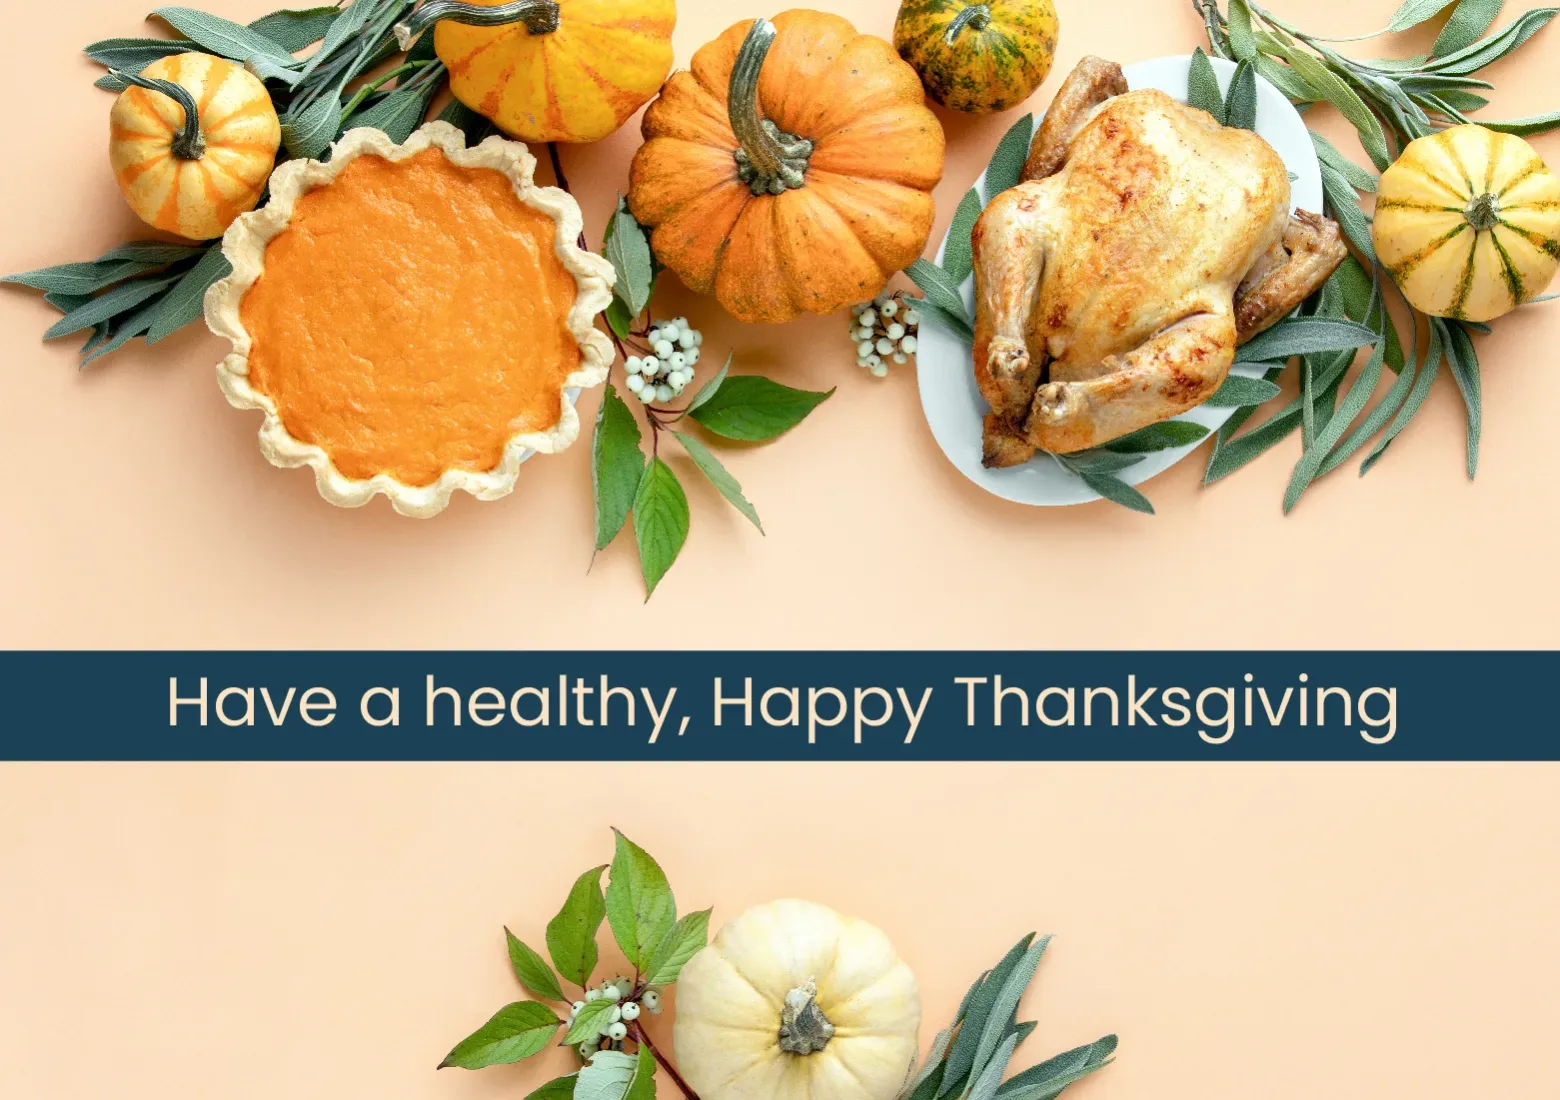 Have-Yourself-a-Healthy-Thanksgiving